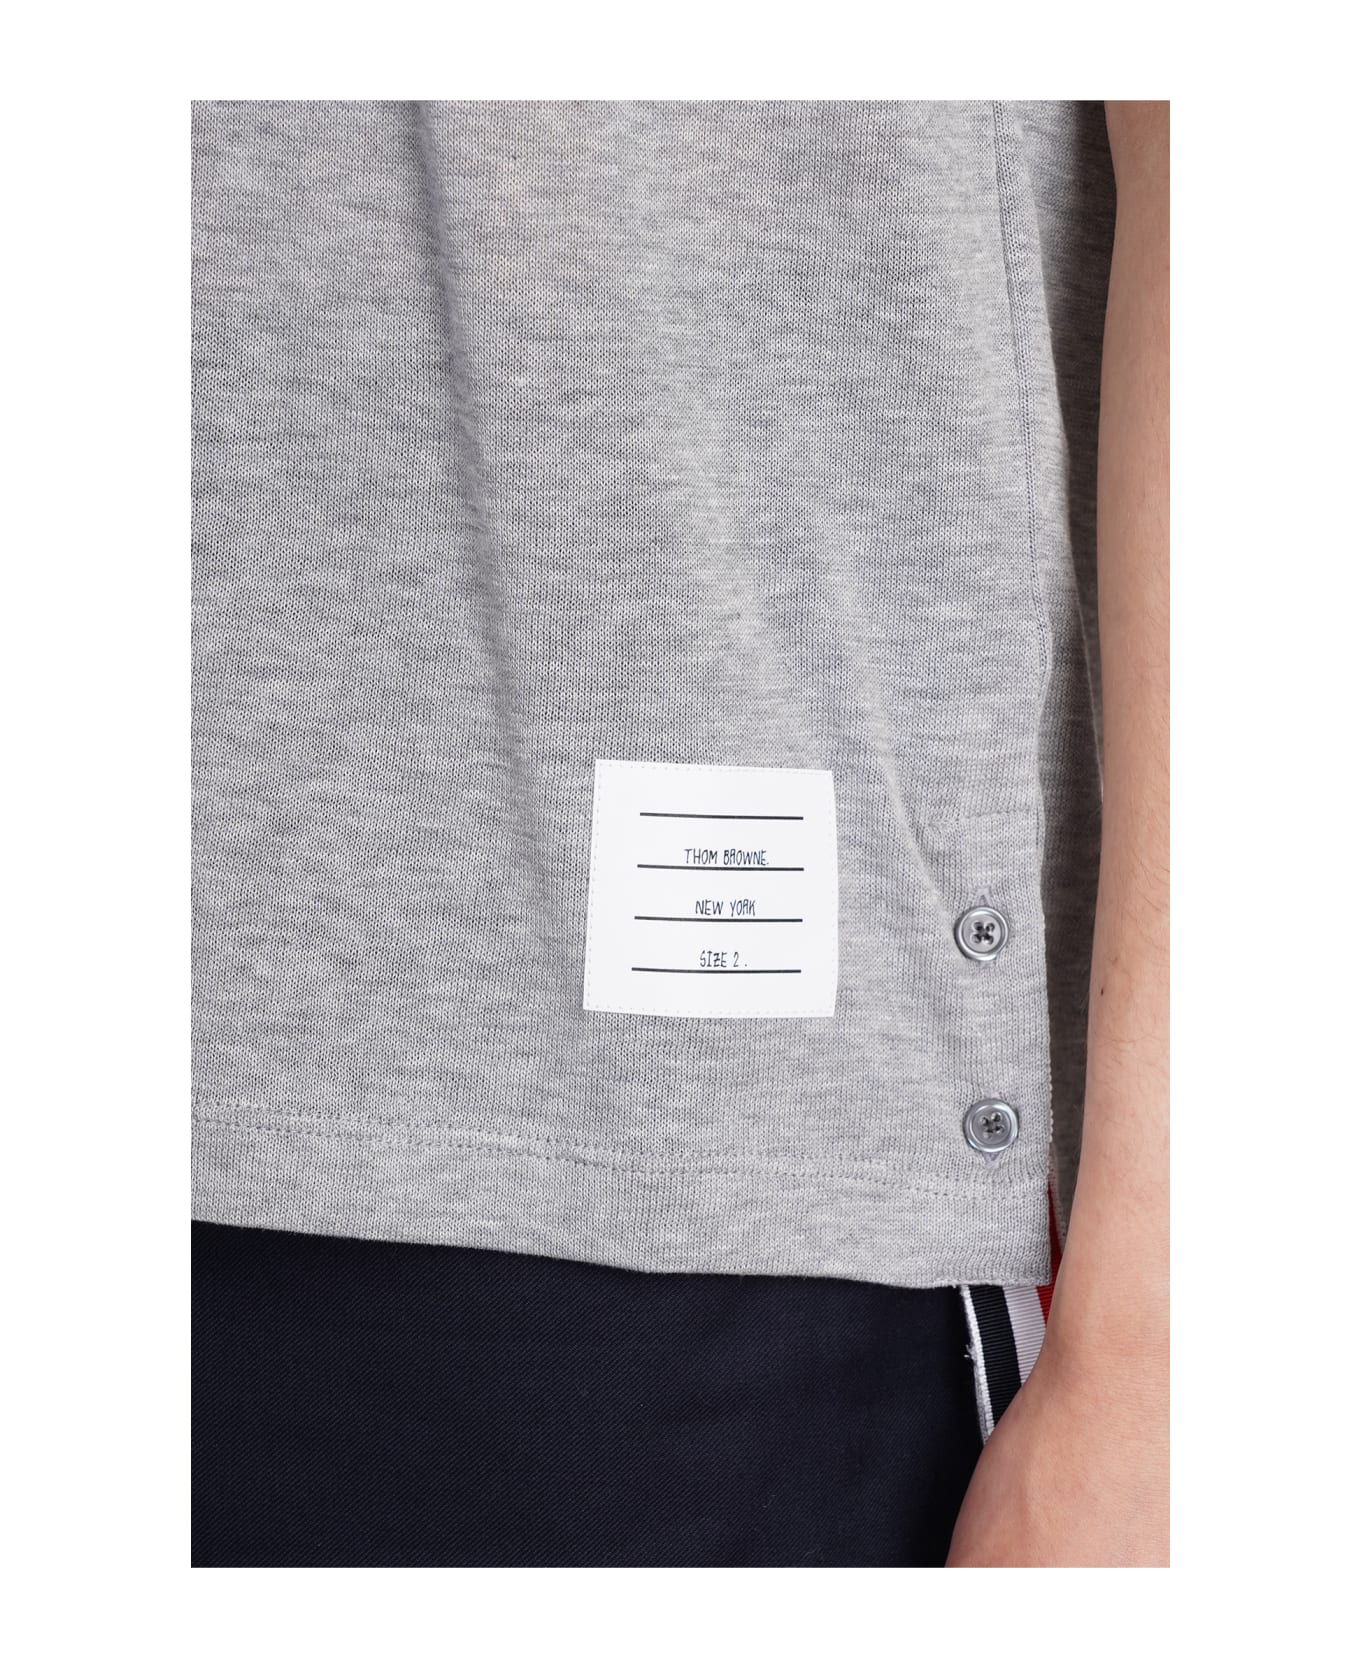 Thom Browne Polo In Grey Cotton - grey